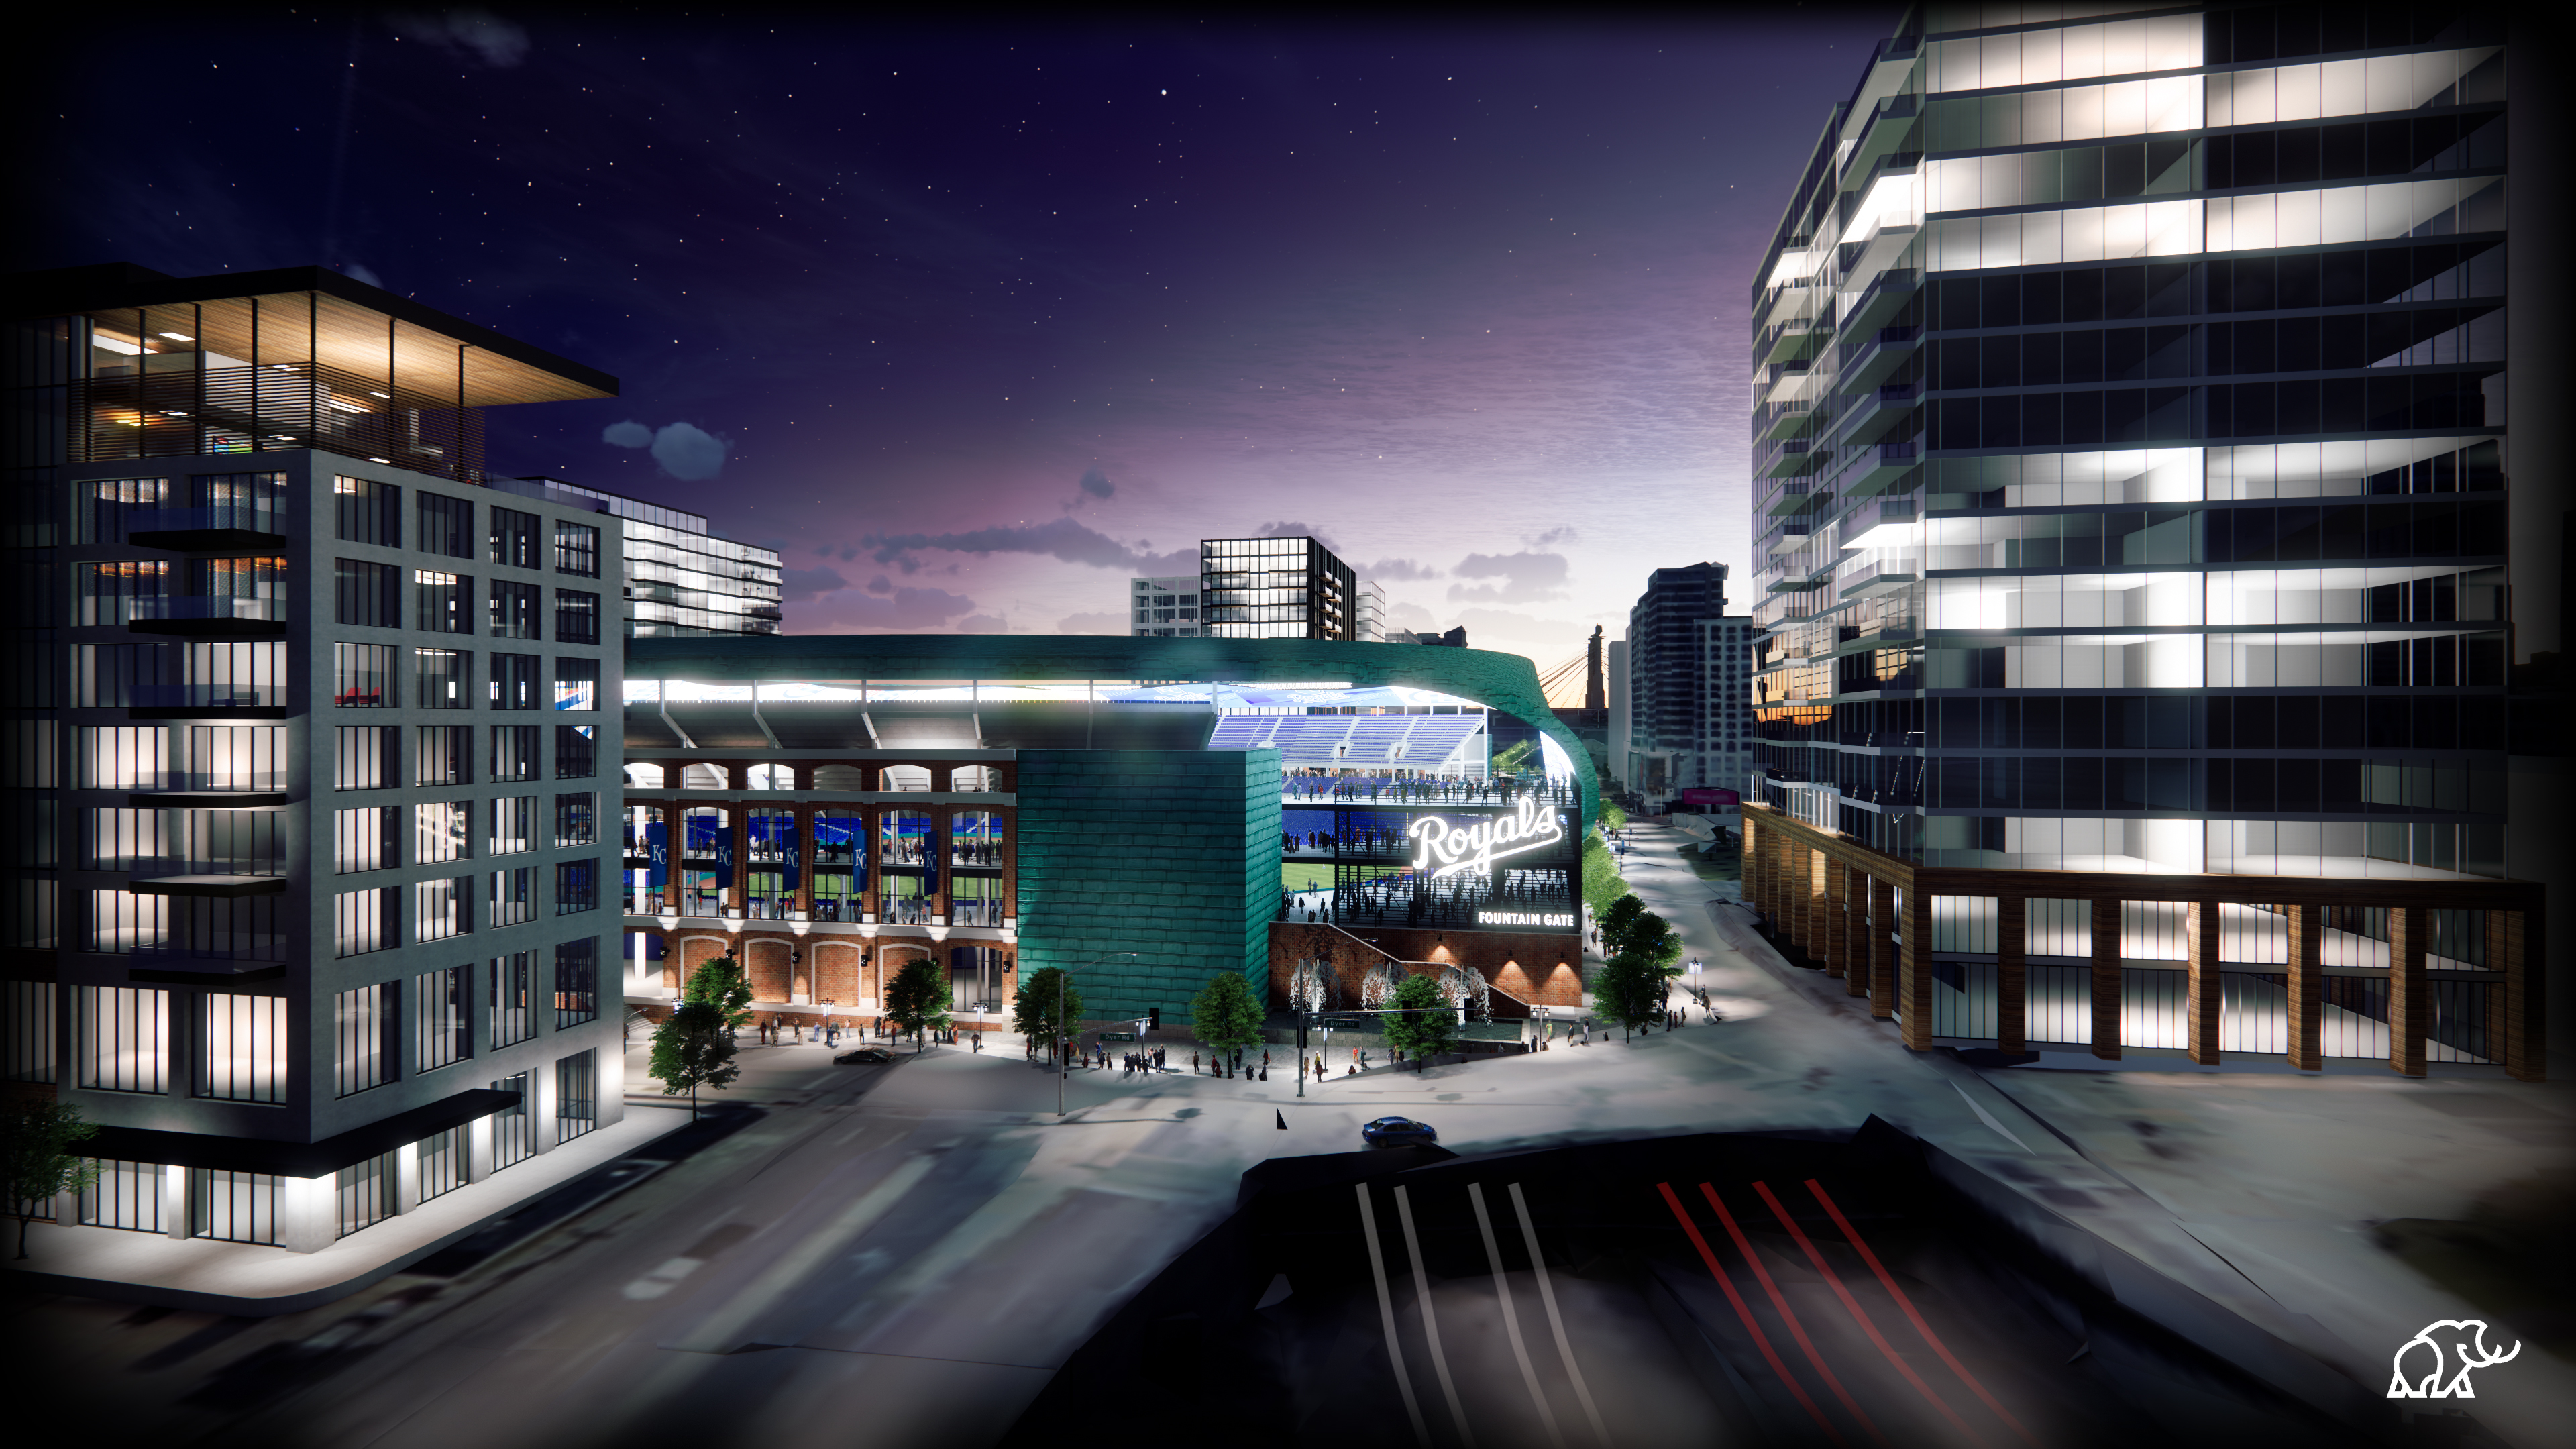 Proposed ballpark would stretch over I-670, be built on site of old KC Star  building: new renderings